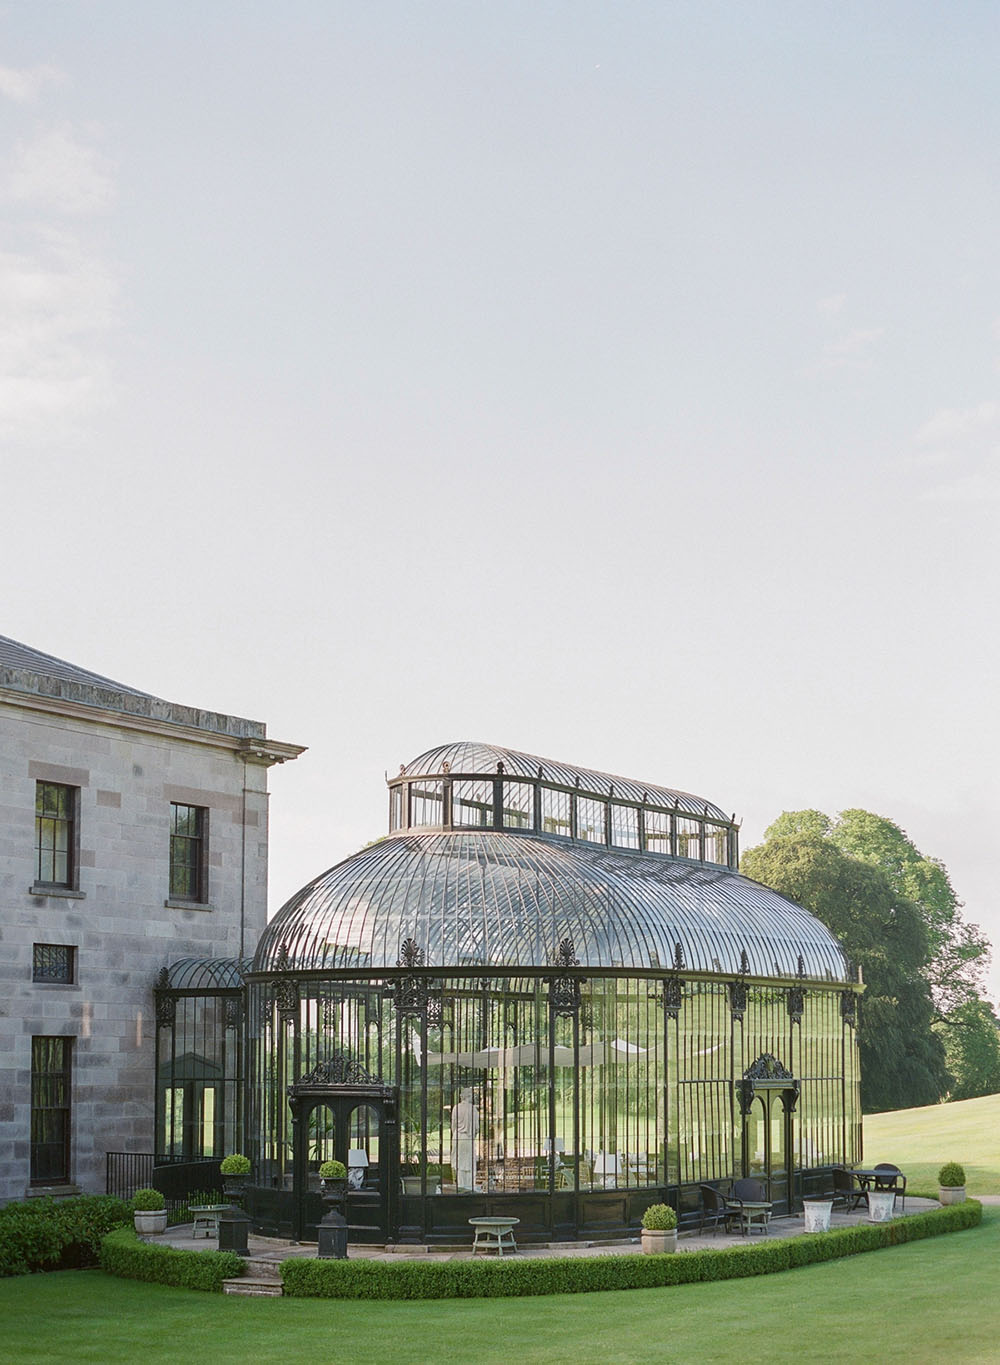 The grand domed conservatory of Ballyfin House in Ireland